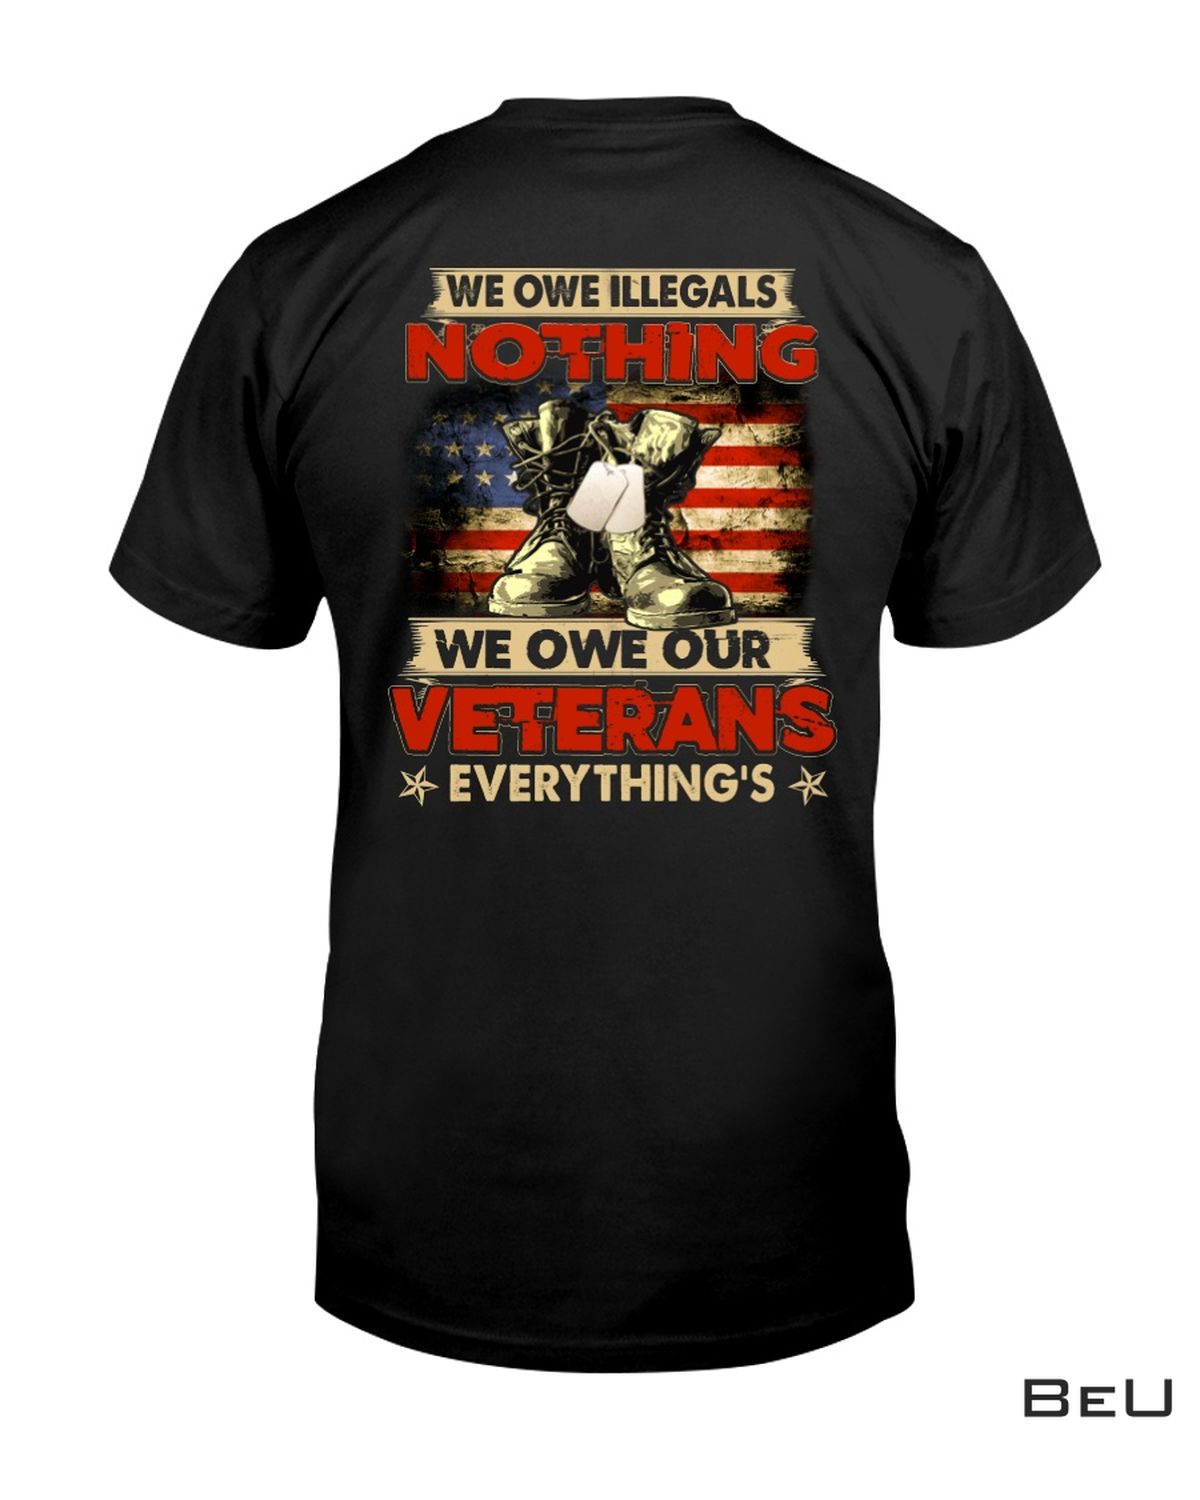 We Owe Illegals Nothing We Owe Our Veterans Everything's Shirt